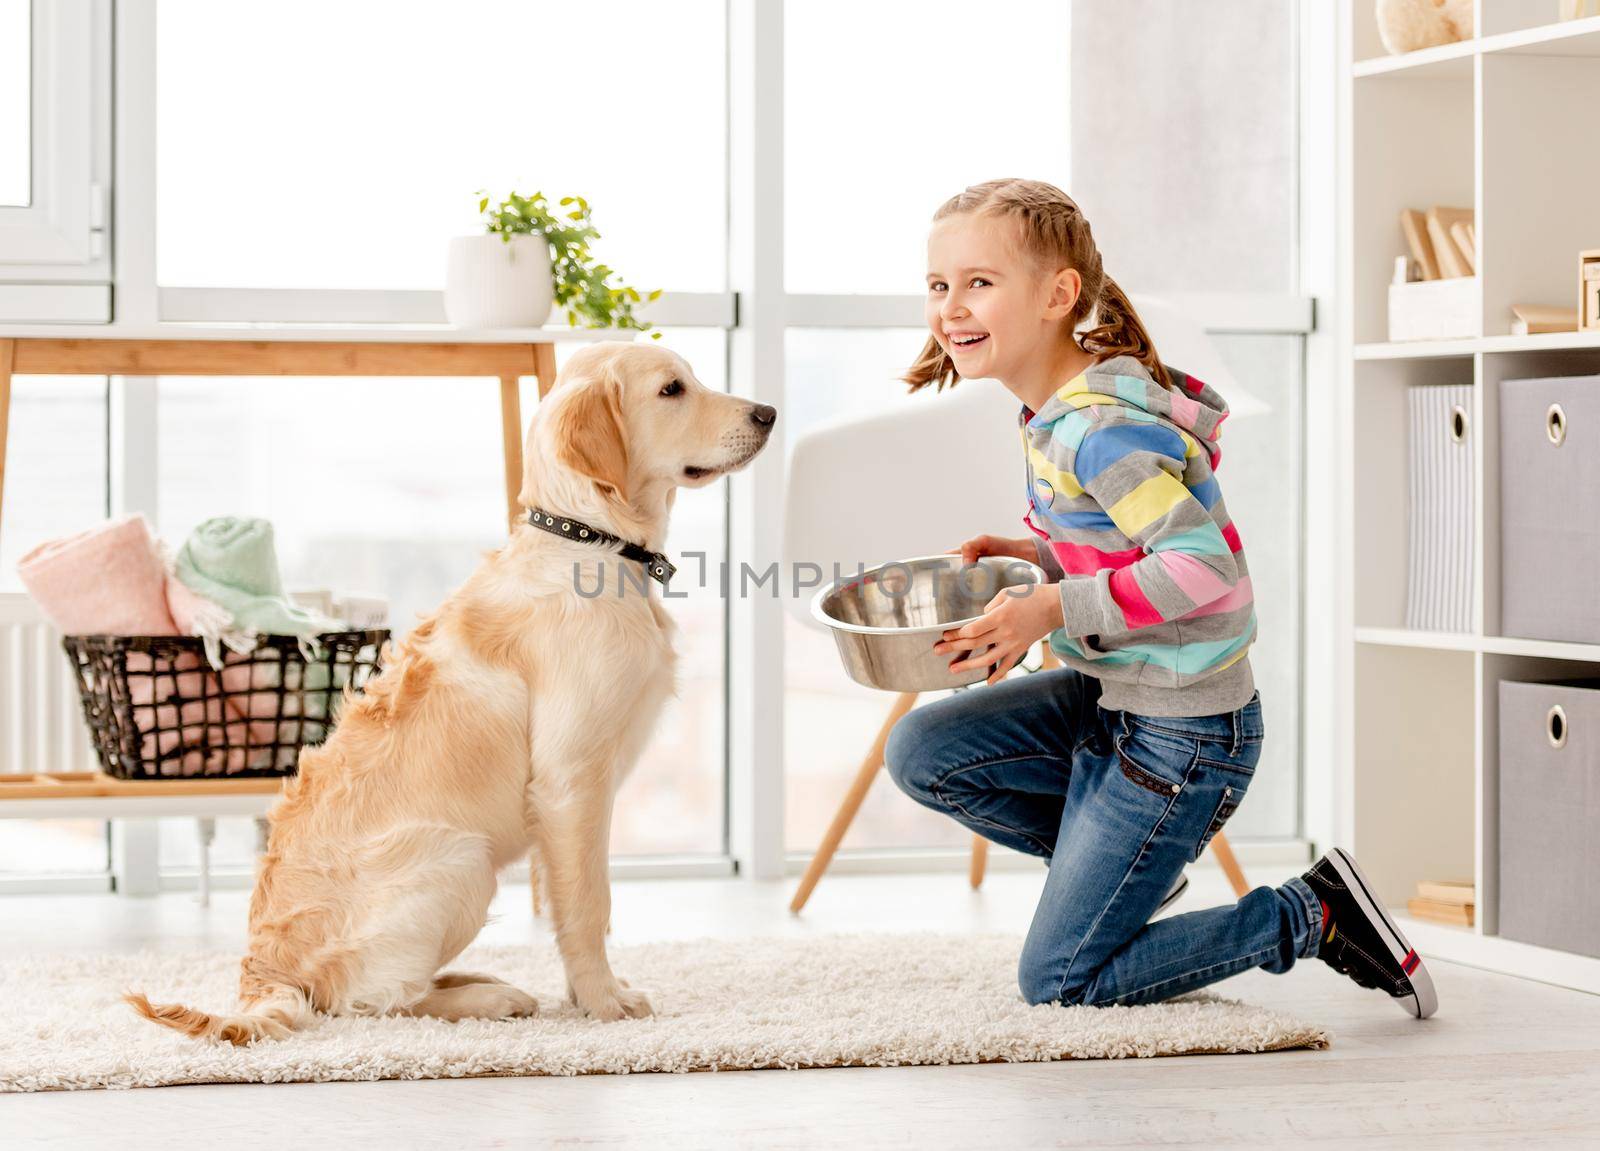 Smiling girl with bowl for adorable dog in living room